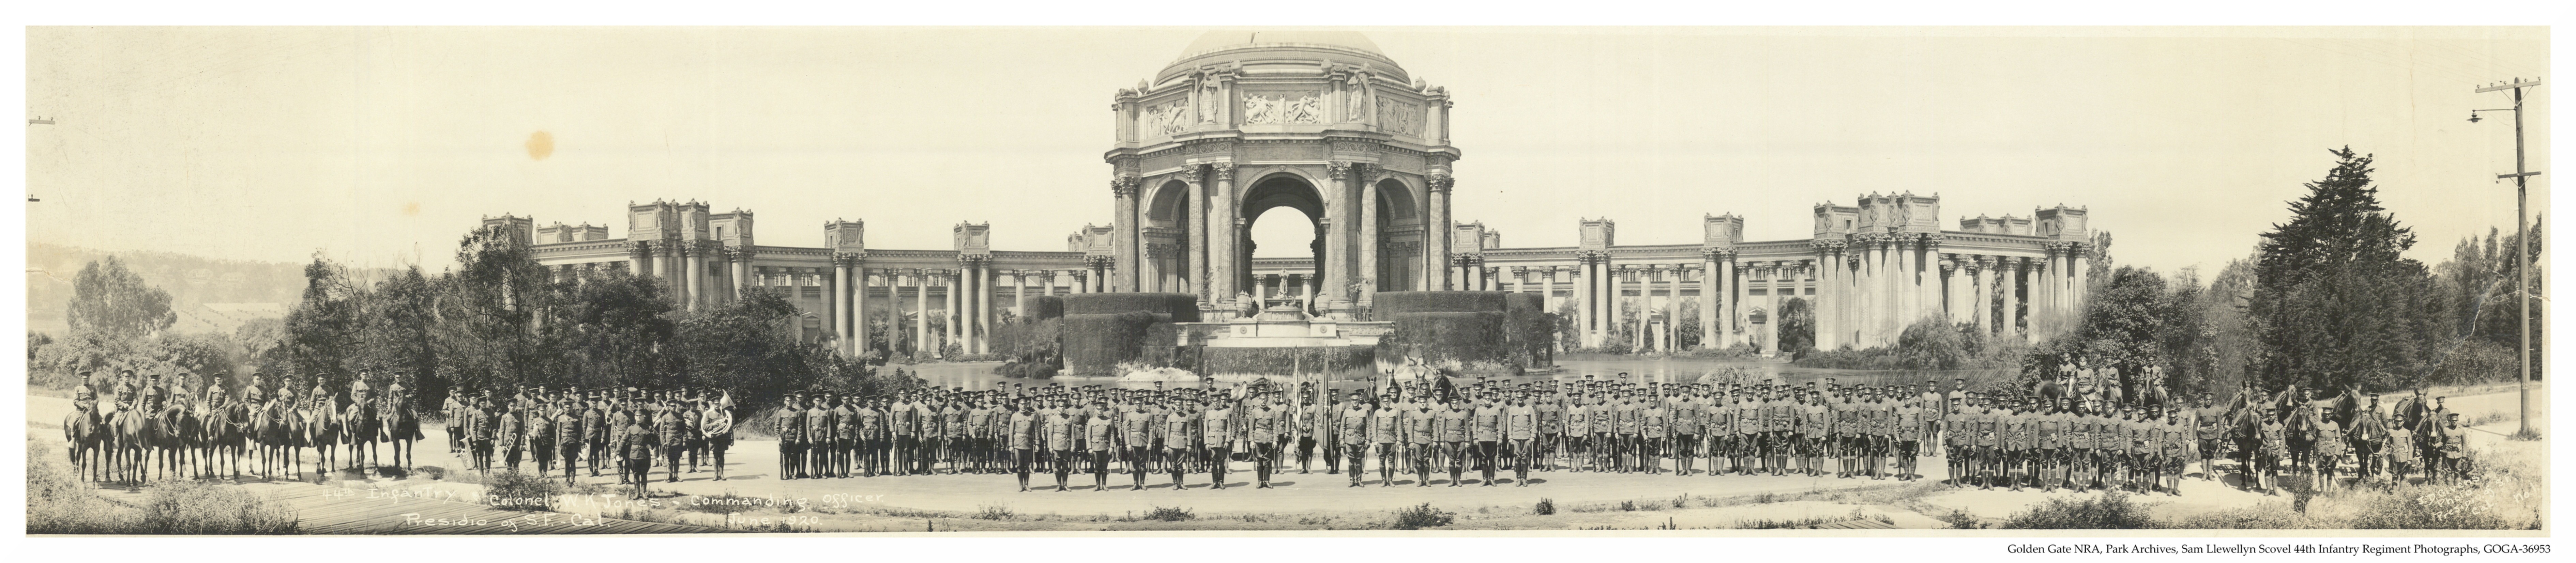 Panoramic of the 44th infantry taken in 1920 in front of the Palace of Fine Arts 